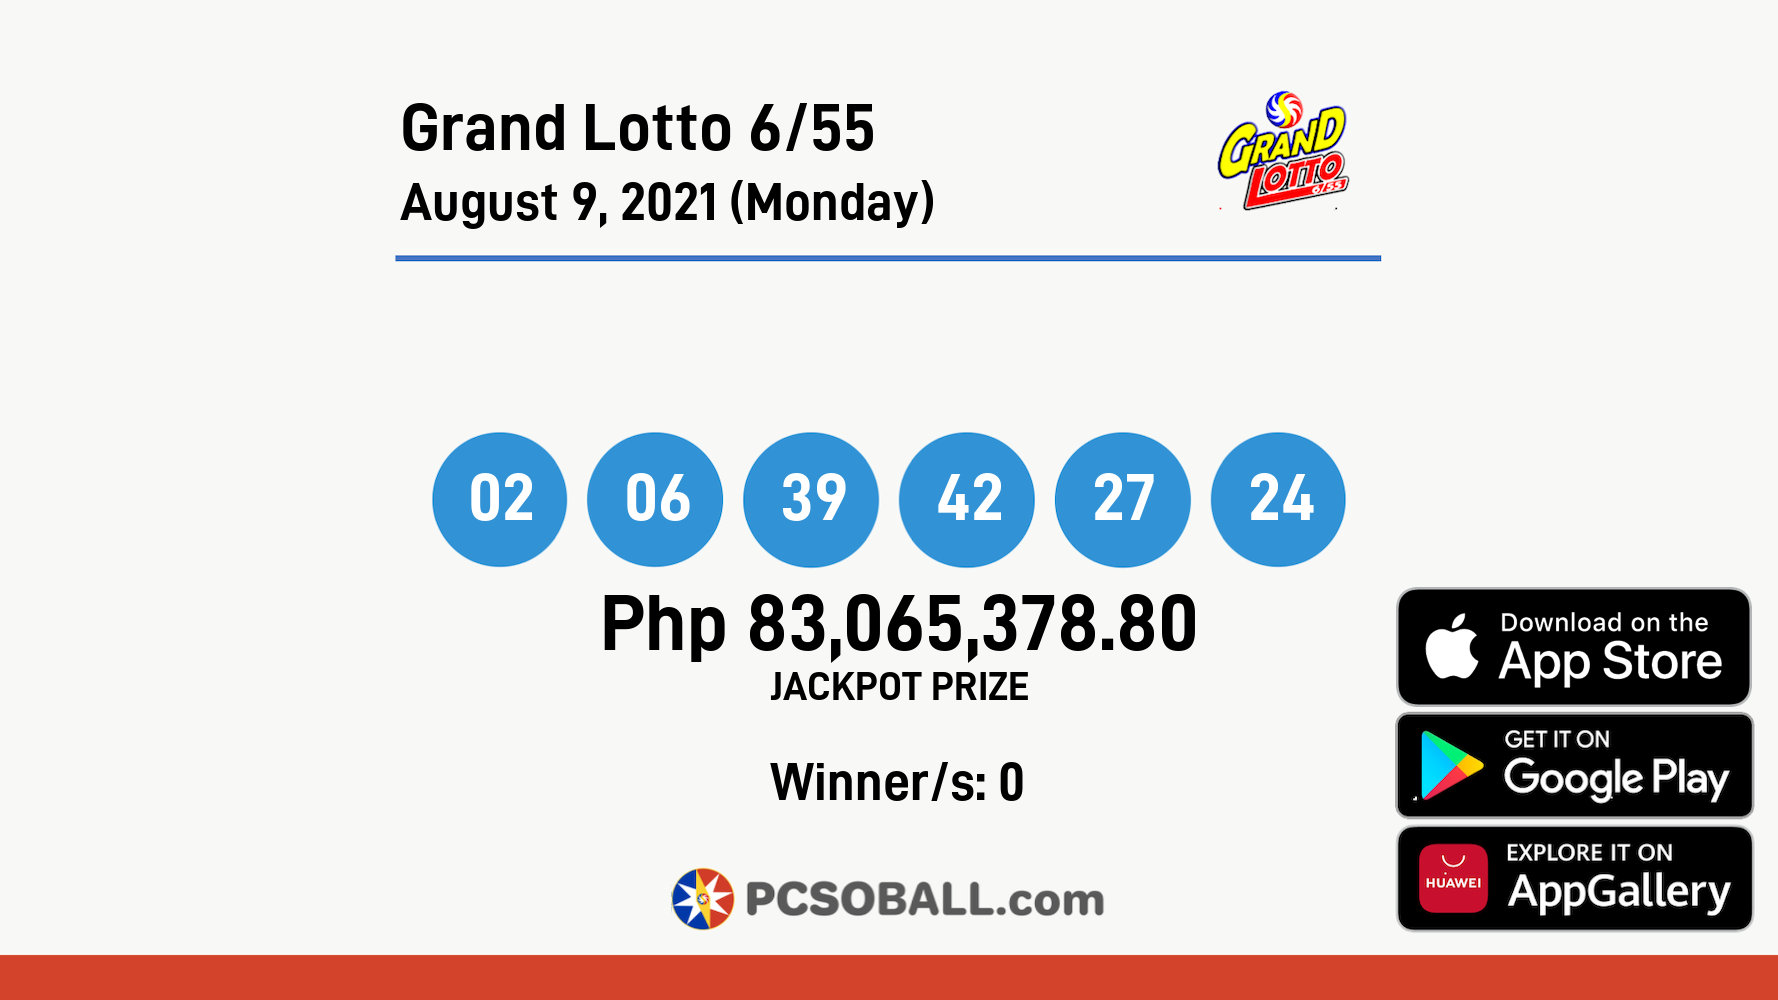 Grand Lotto 6/55 August 9, 2021 (Monday) Result